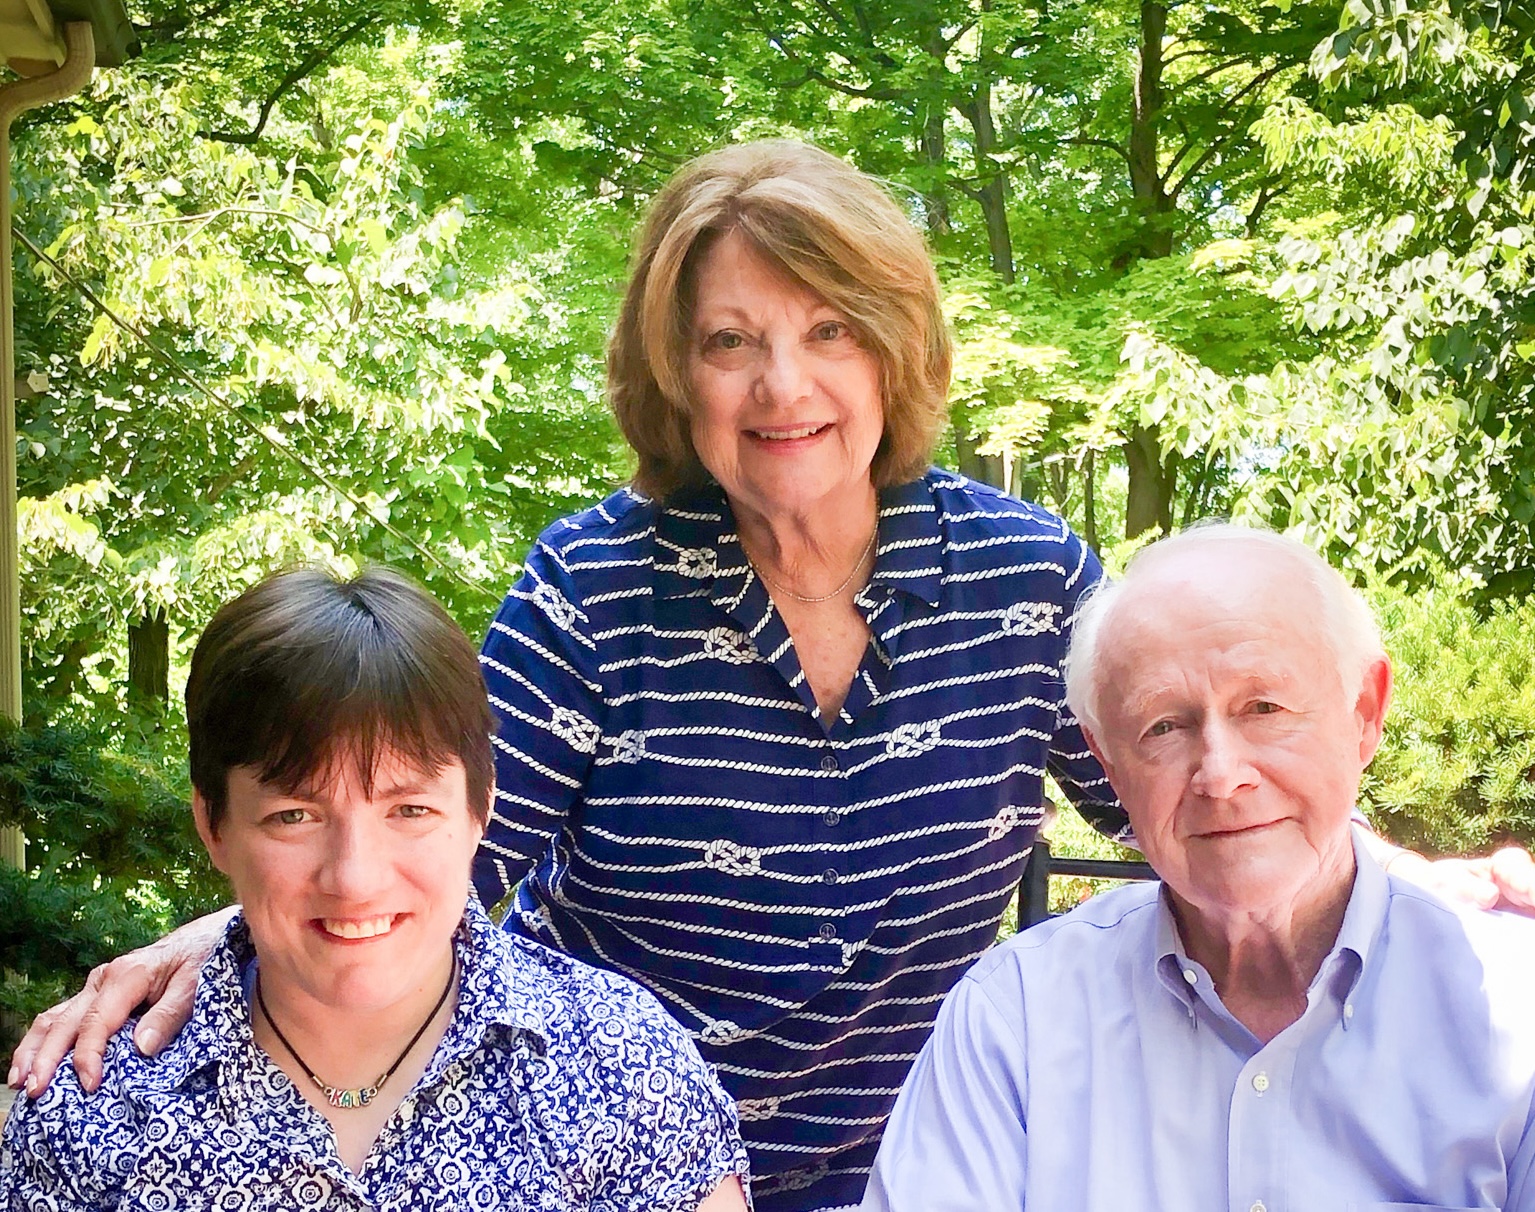 Family photo of Phyllis Breen standing between her daughter on the left and husband on the right with green foliage and sunlight in the backgroud.